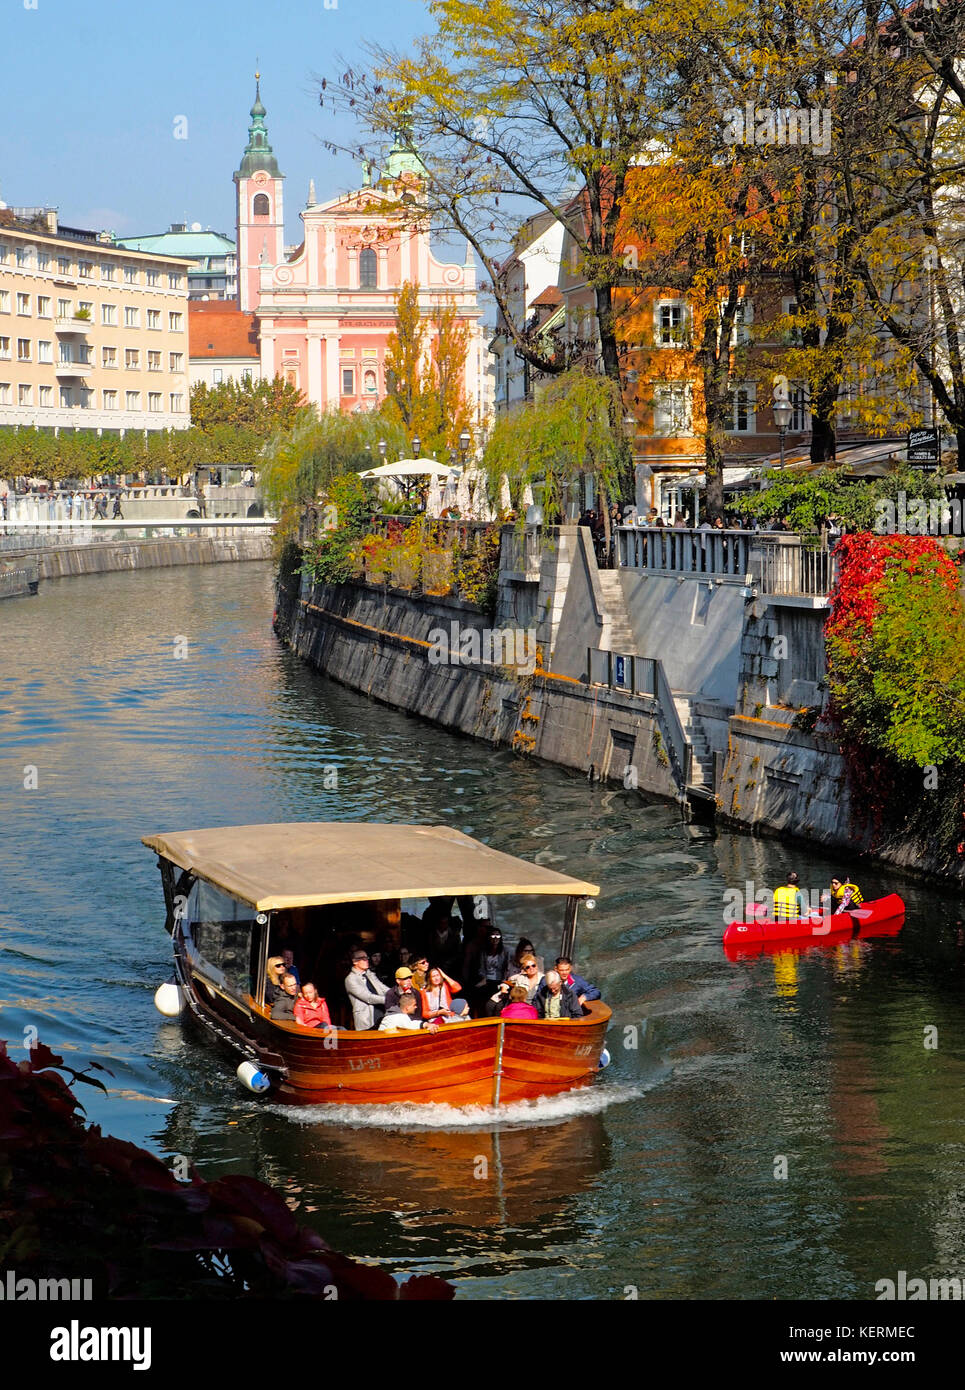 Ljubjlanica River in Old Town Ljubljana, Slovenia, with tourist cruise boat and recreational canoers. Stock Photo